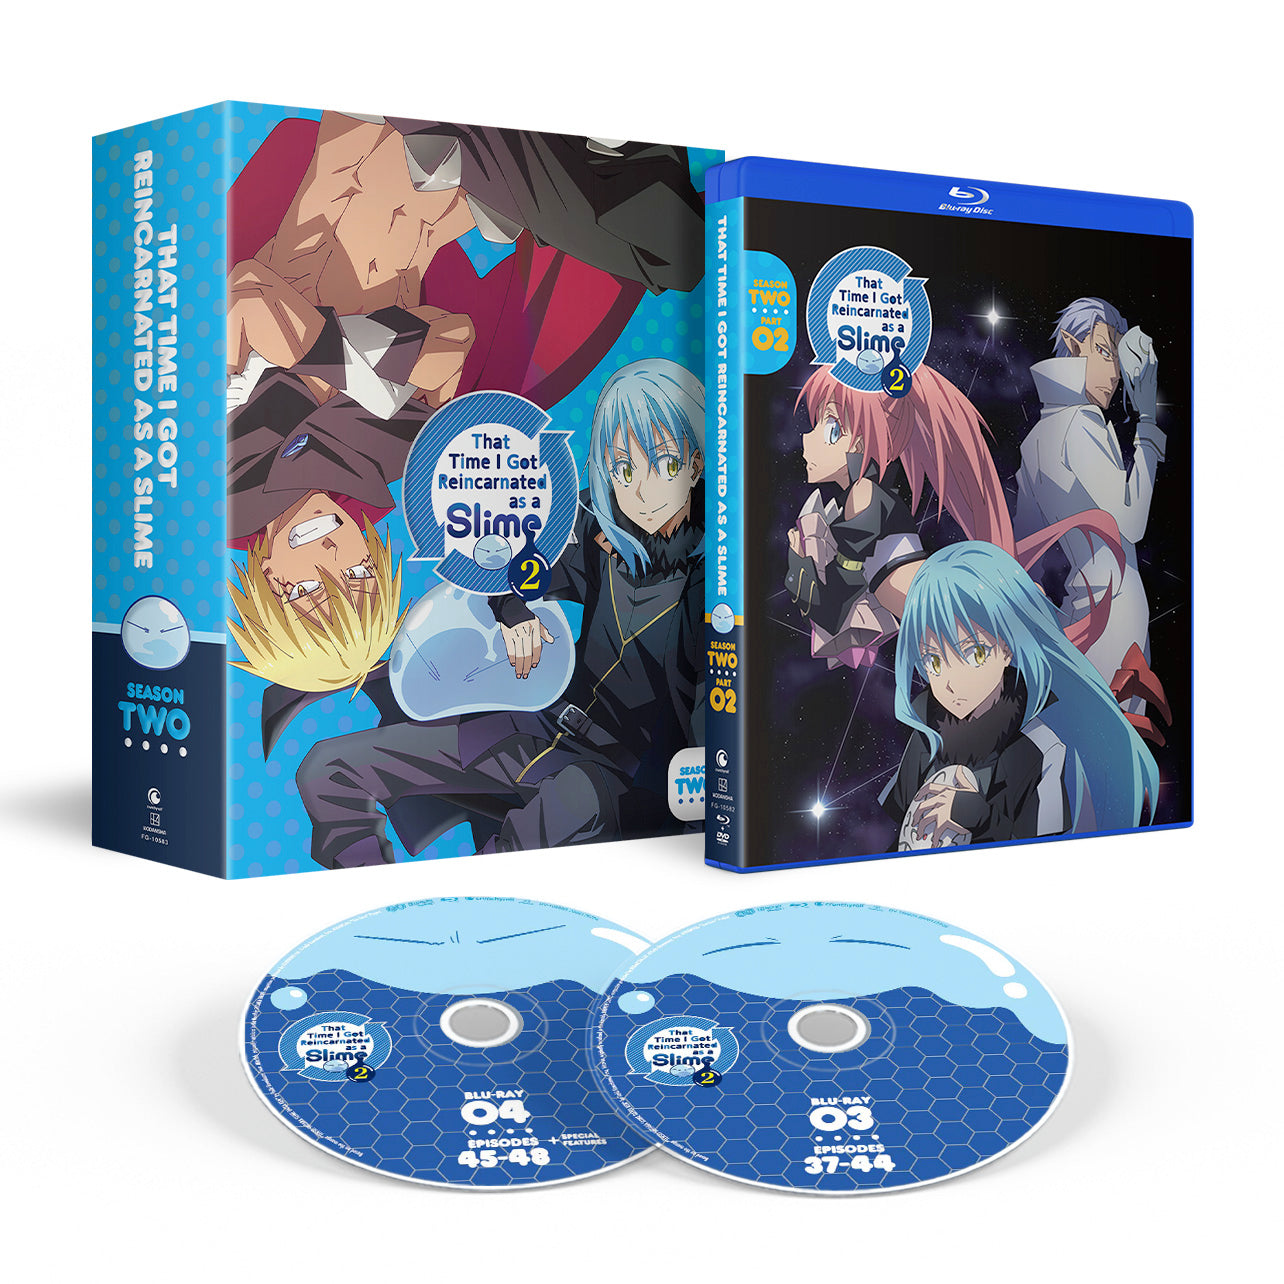 That Time I Got Reincarnated as a Slime - Season 2 Part 2 - BD/DVD - LE image count 1